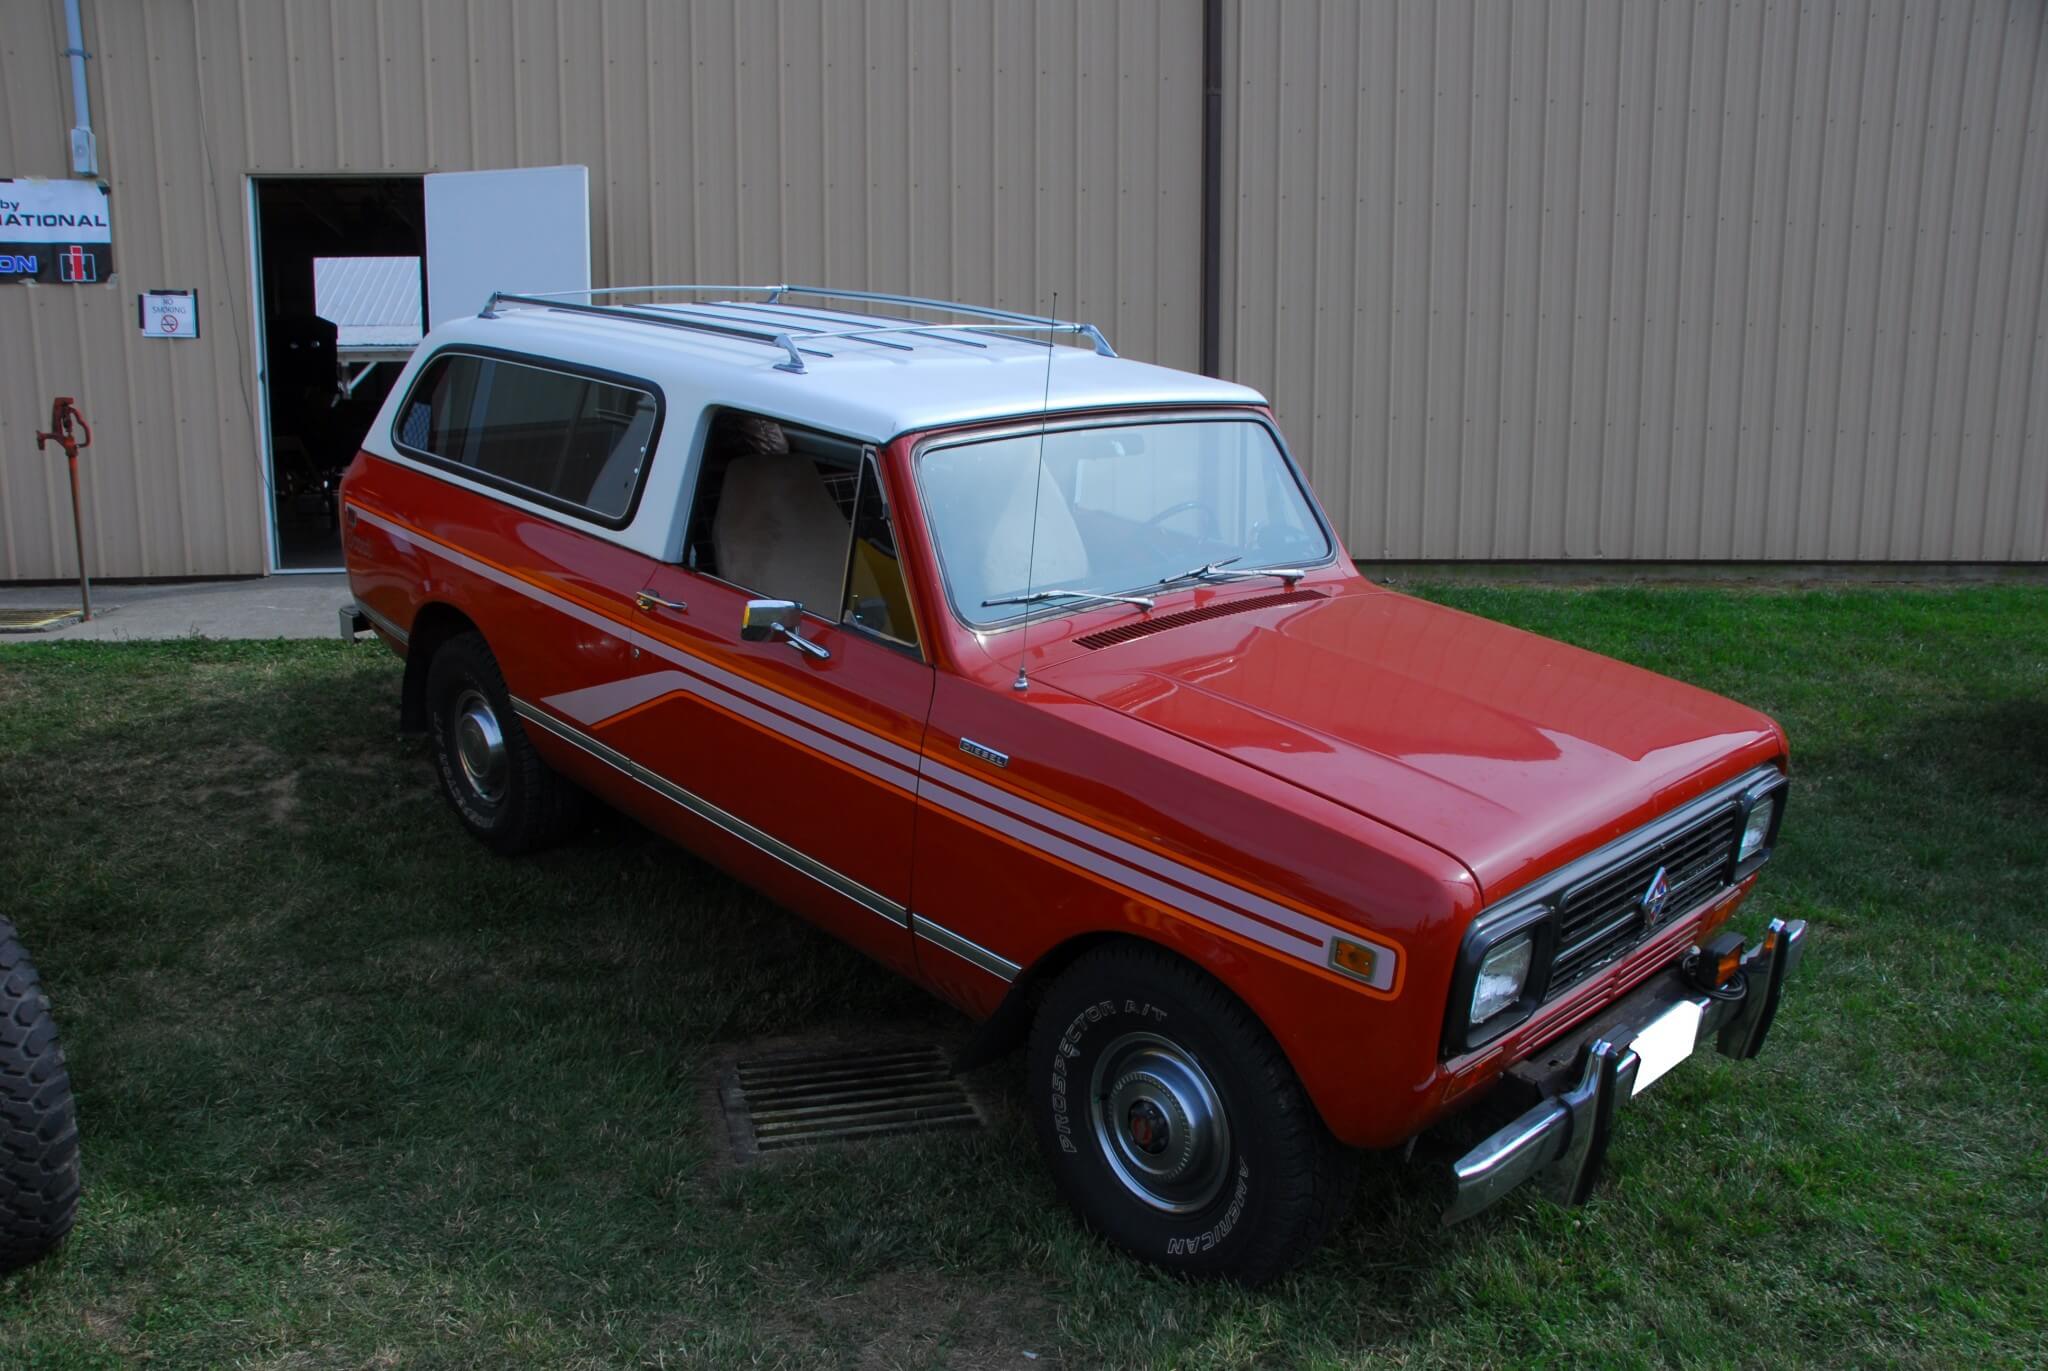 The Traveler SUV replaced the legendary Travelall. Though it only came as a two-door, it had plenty of room for six passengers. Towing capacity was the same as the other Scouts, about 10,000 lbs. Carl and Mary Kindberg’s 1980 Traveler came from Nebraska in 2006, and the engine failed a few months later. The Kindbergs transplanted a rebuilt SD-33T with what have now become typical mods: Mercedes 300D turbine housing and impeller, modified exhaust, and a turned-up pump. On a recent 1,800-mile trip, the Traveler averaged 21.9 mpg.